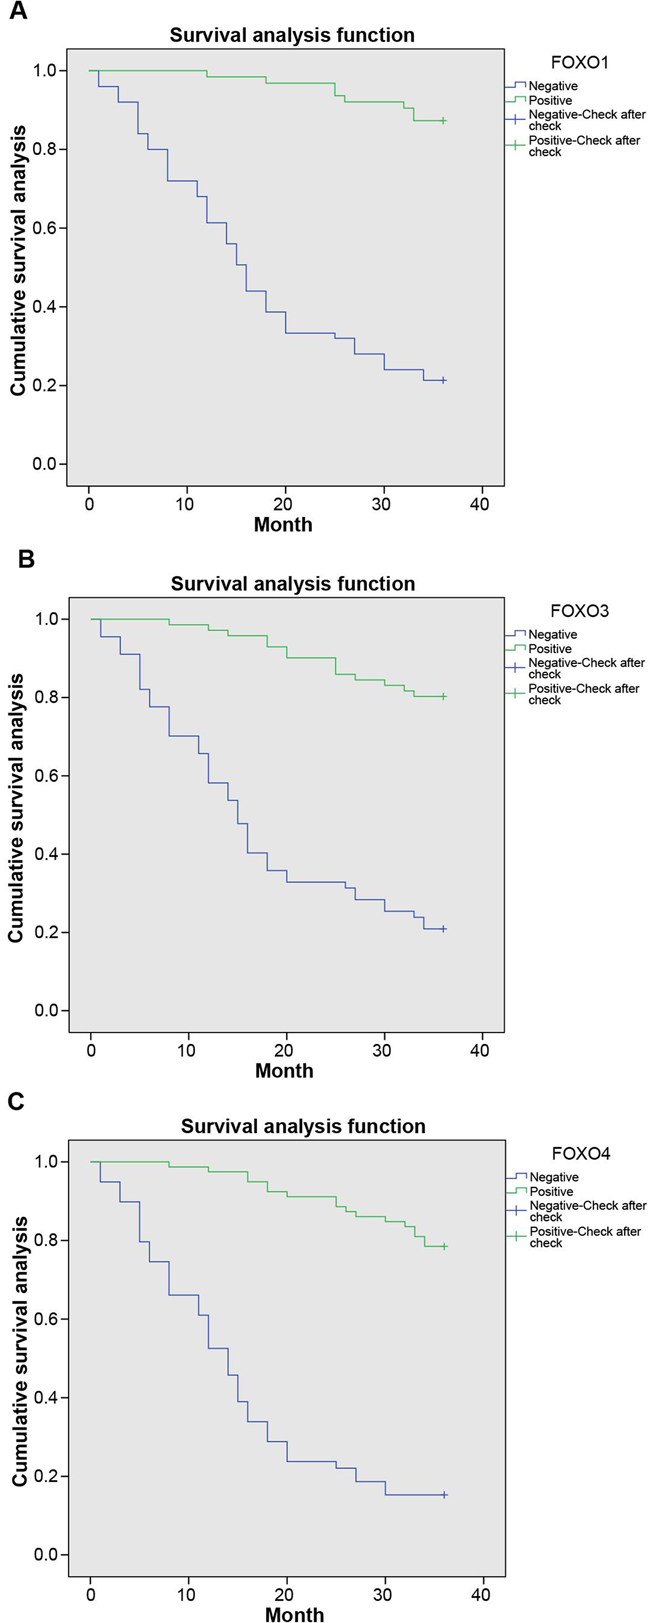 The Kaplan-Meier curve of associations between expression of FOXOs and survival time of patients with bladder cancer.